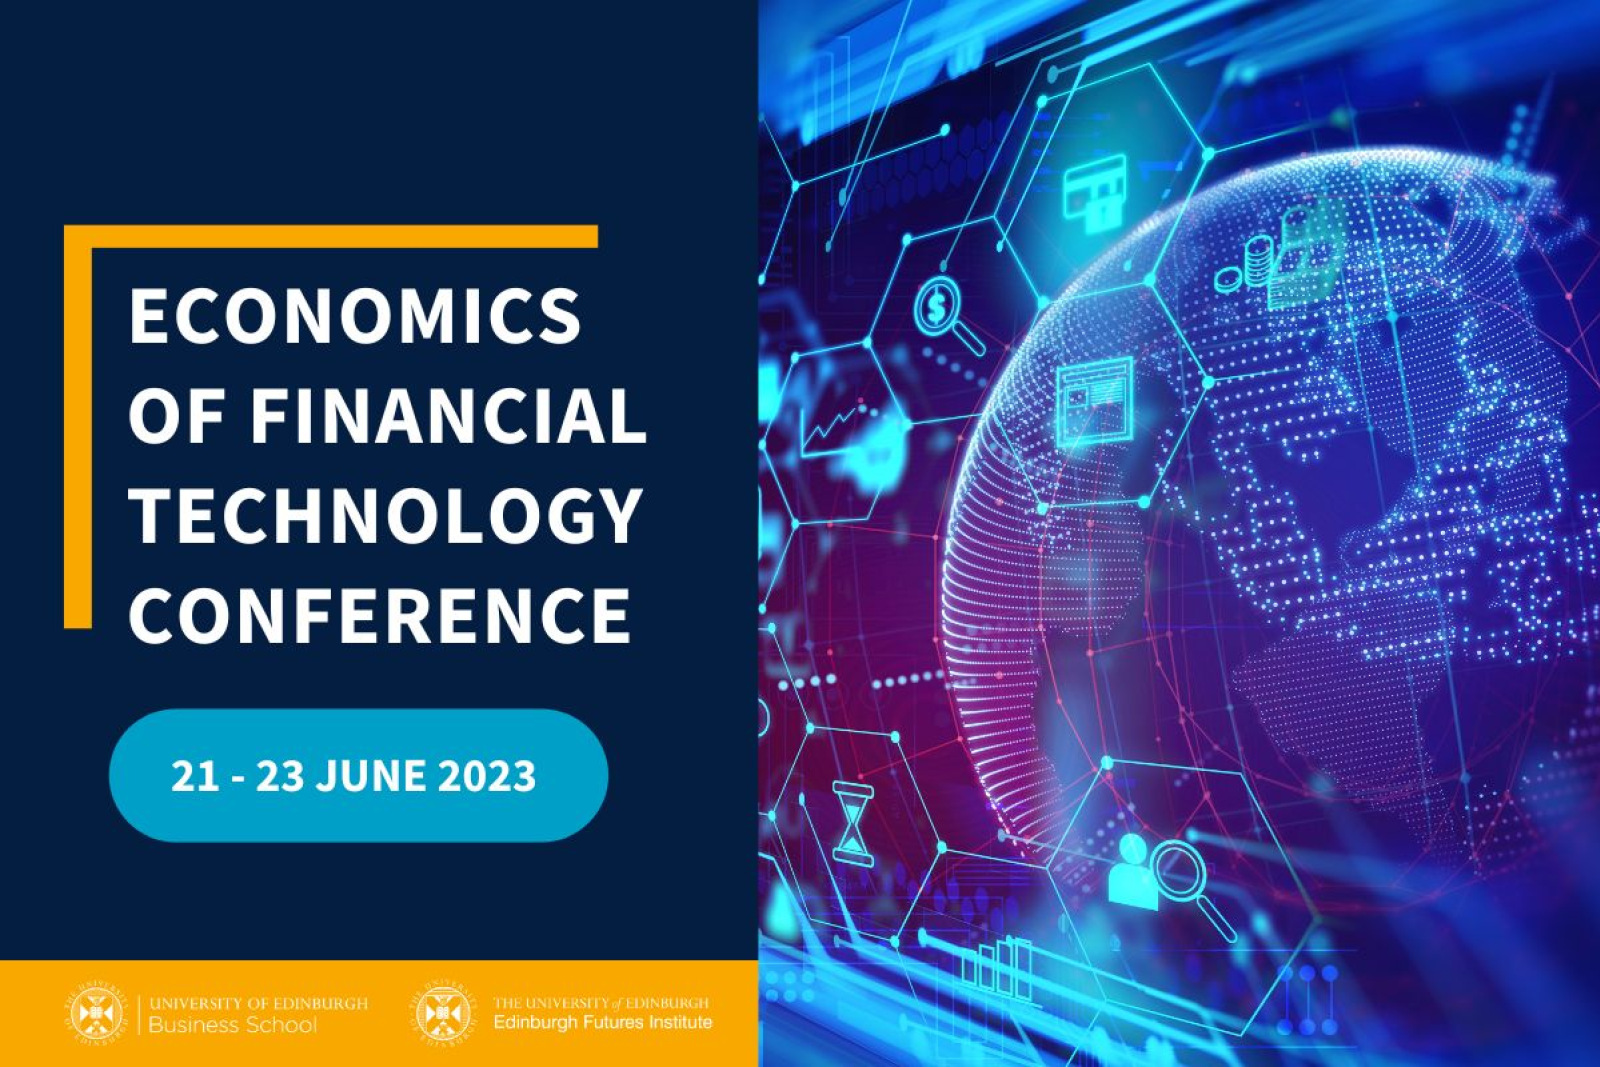 Economics of Financial Technology Conference. 21 to 23 June 2023. Digital graphic of globe with finance-related symbols. 